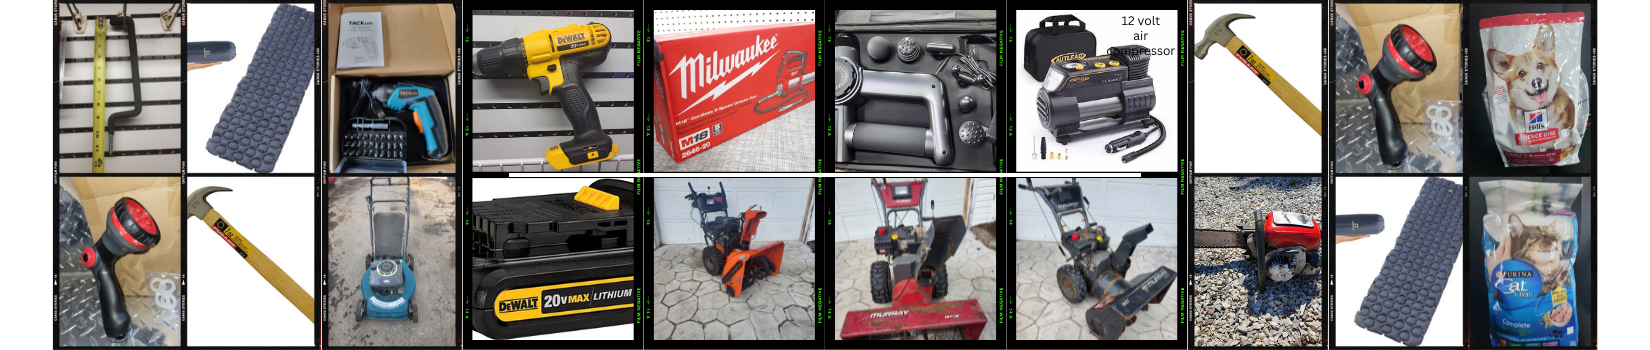 Zehr's Sale May 4th Lawn Mowers, Equipment, Tools and More Online Auction